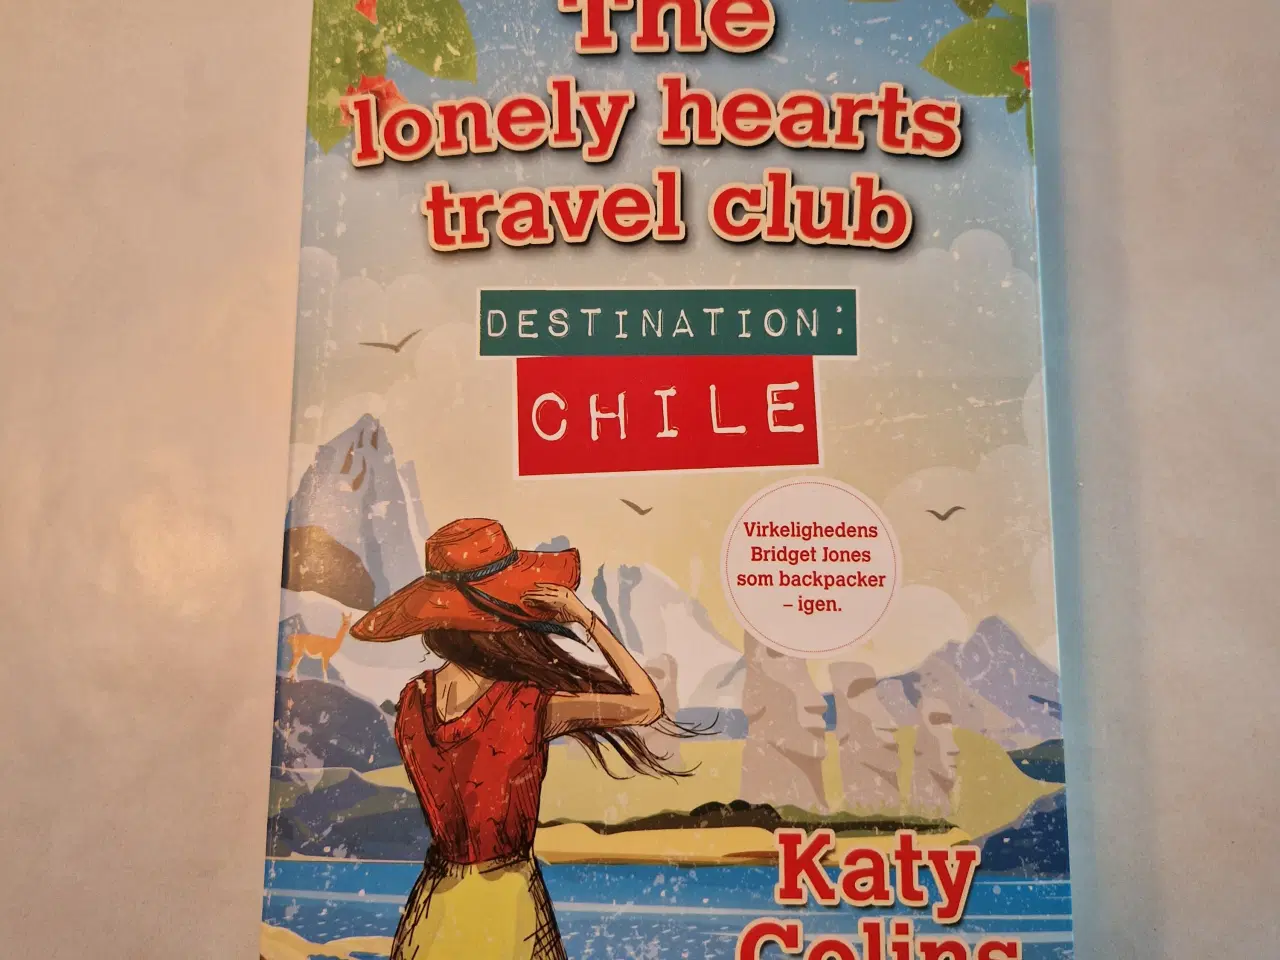 Billede 2 - The lonely hearts Travelocity club Chile, Katy Col